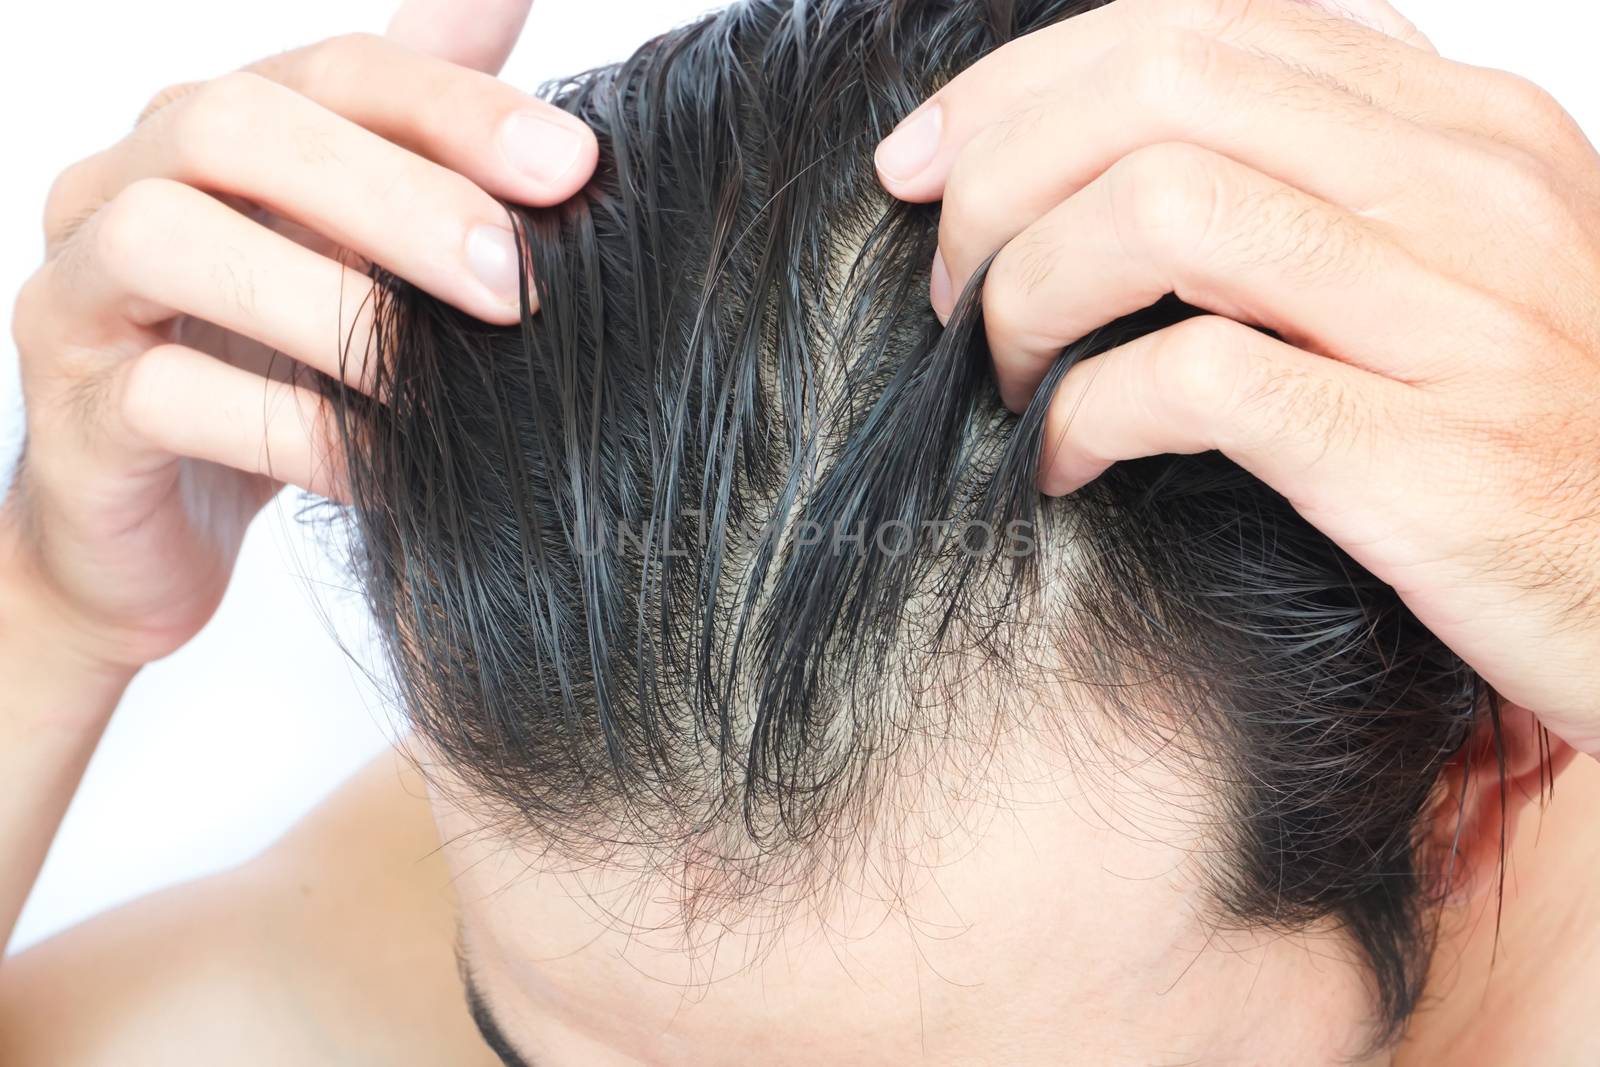 Young man serious hair loss problem for health care medical and  by pt.pongsak@gmail.com